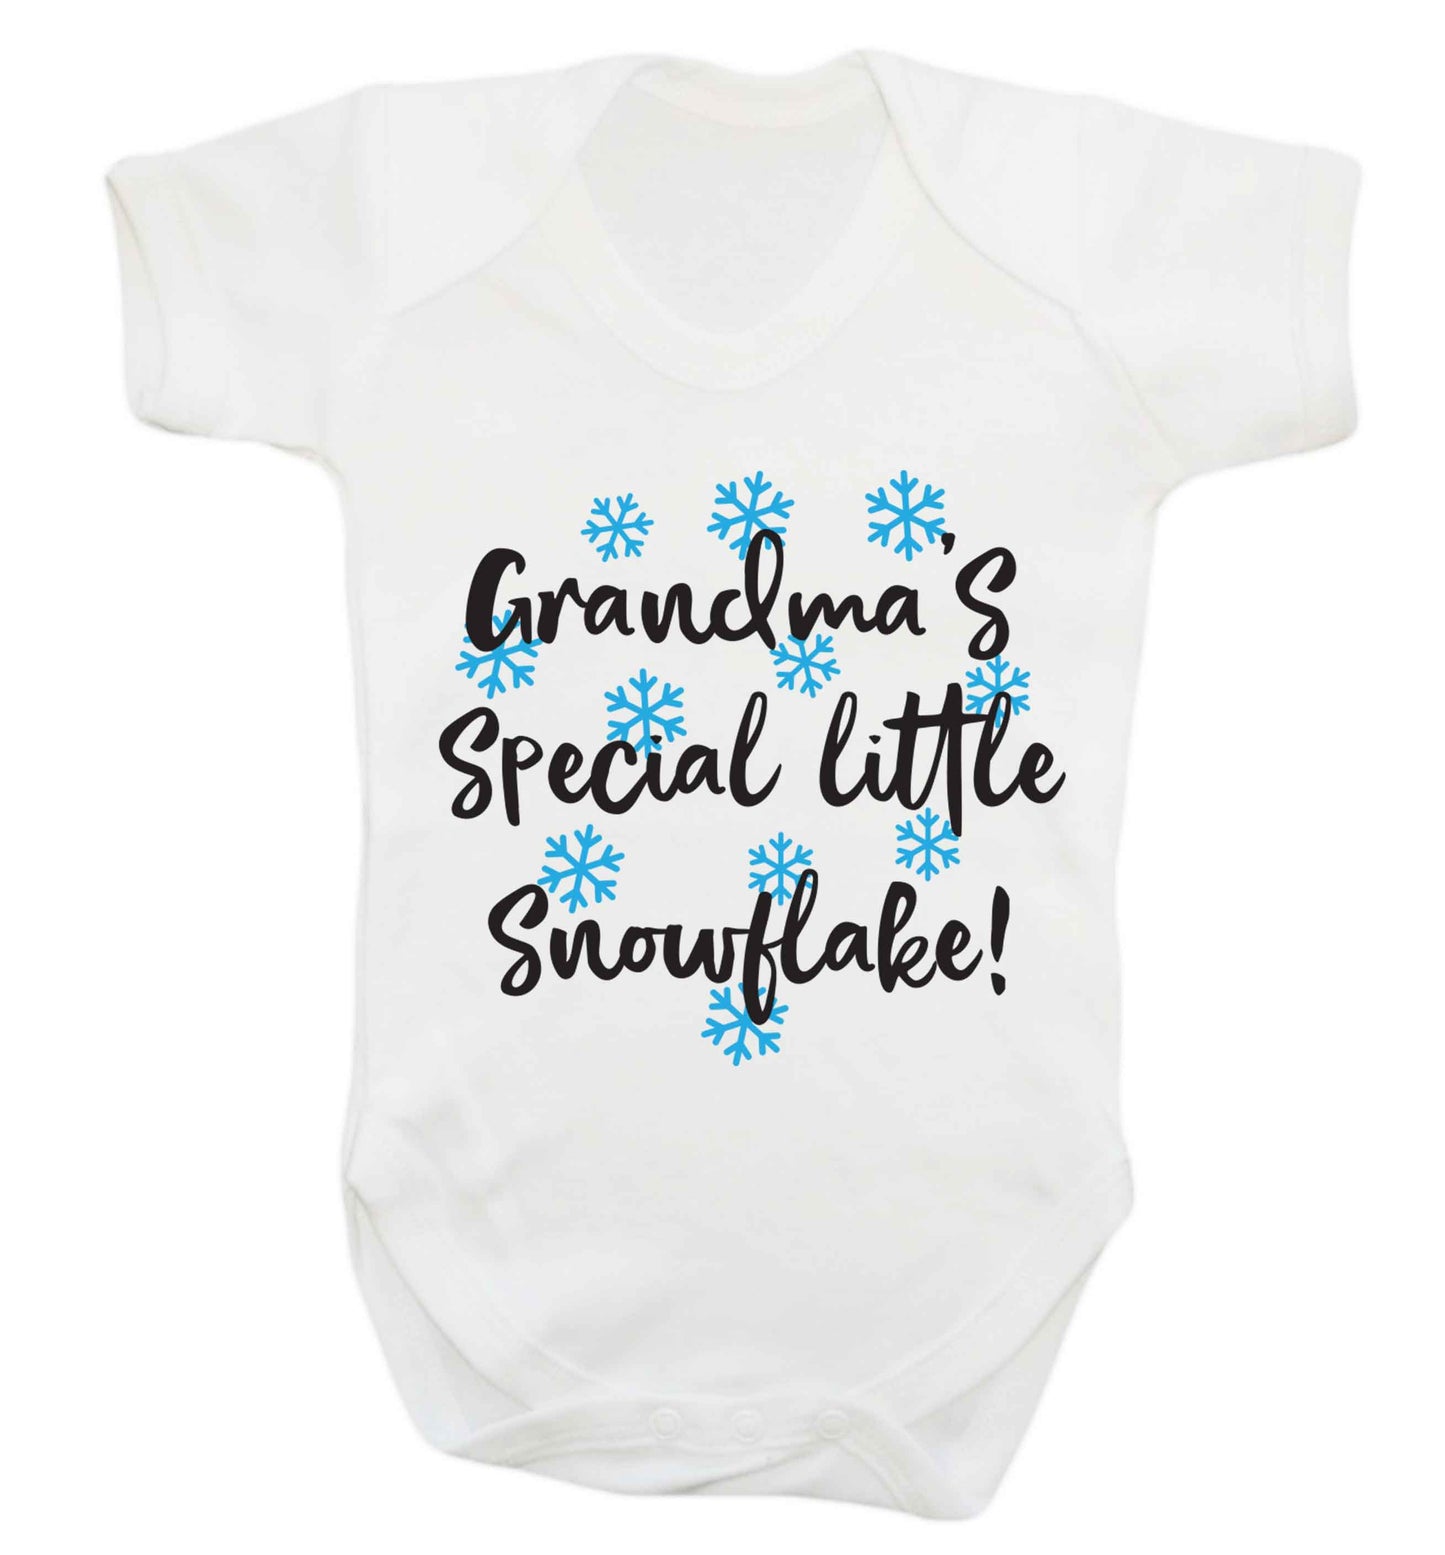 Grandma's special little snowflake Baby Vest white 18-24 months